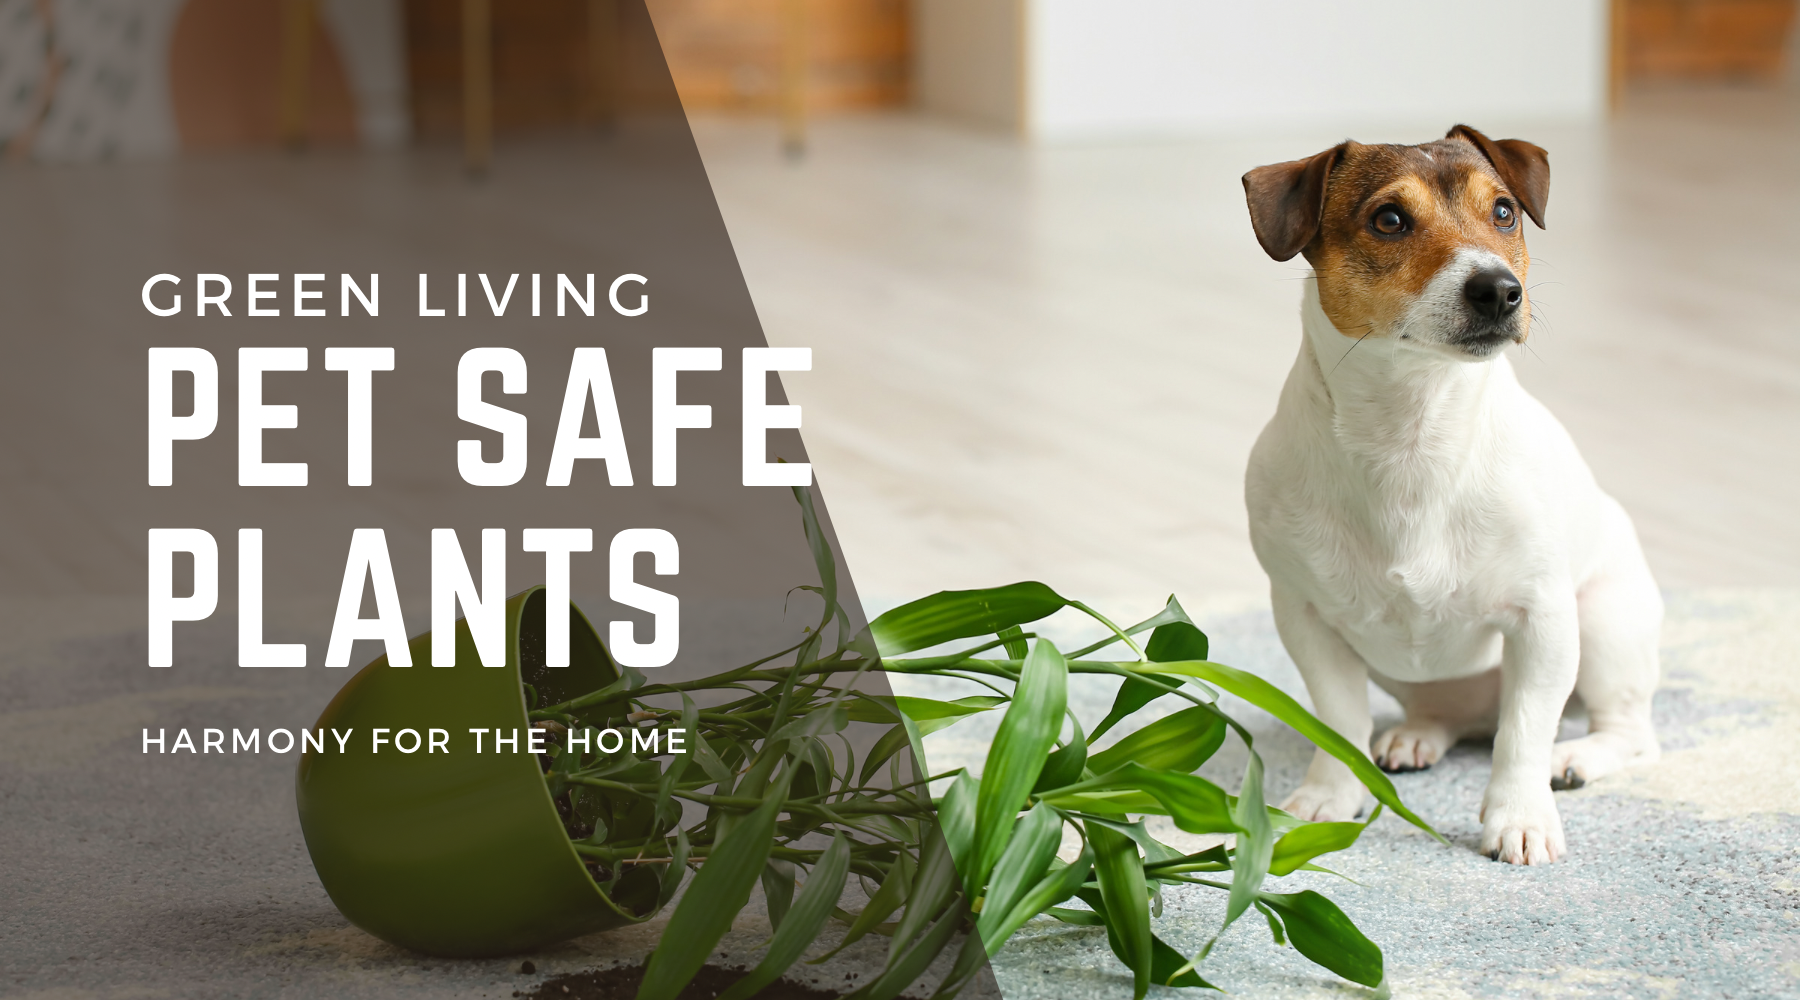 Green Living: Embracing Pet-Safe Plants in Your Home - A Guide to Airplants, Dracaena Janet Craig, and Parlour Palms